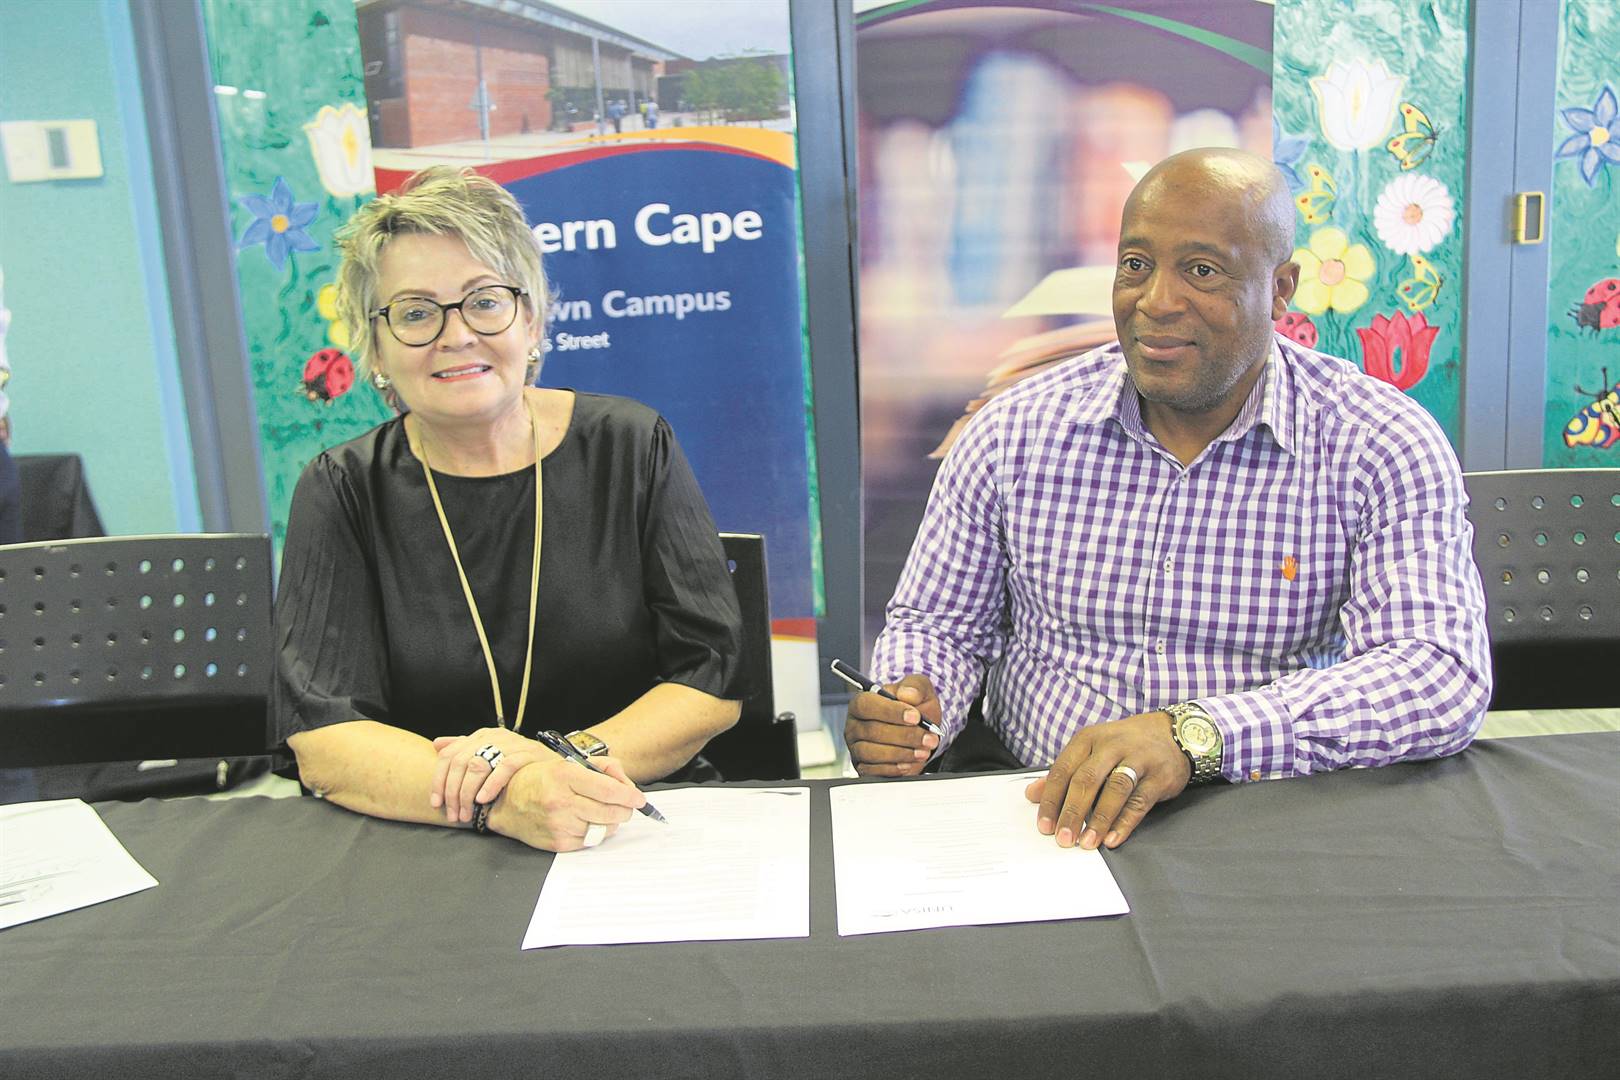 Signing of the partnership. Pictured is Michelle Frauendorf, Unisa Cape Town Campus Acting Regional Director and Phumzile Mbaliswana, Director of Corporate and Public Safety Services.Photo: Noluvu Ludidi